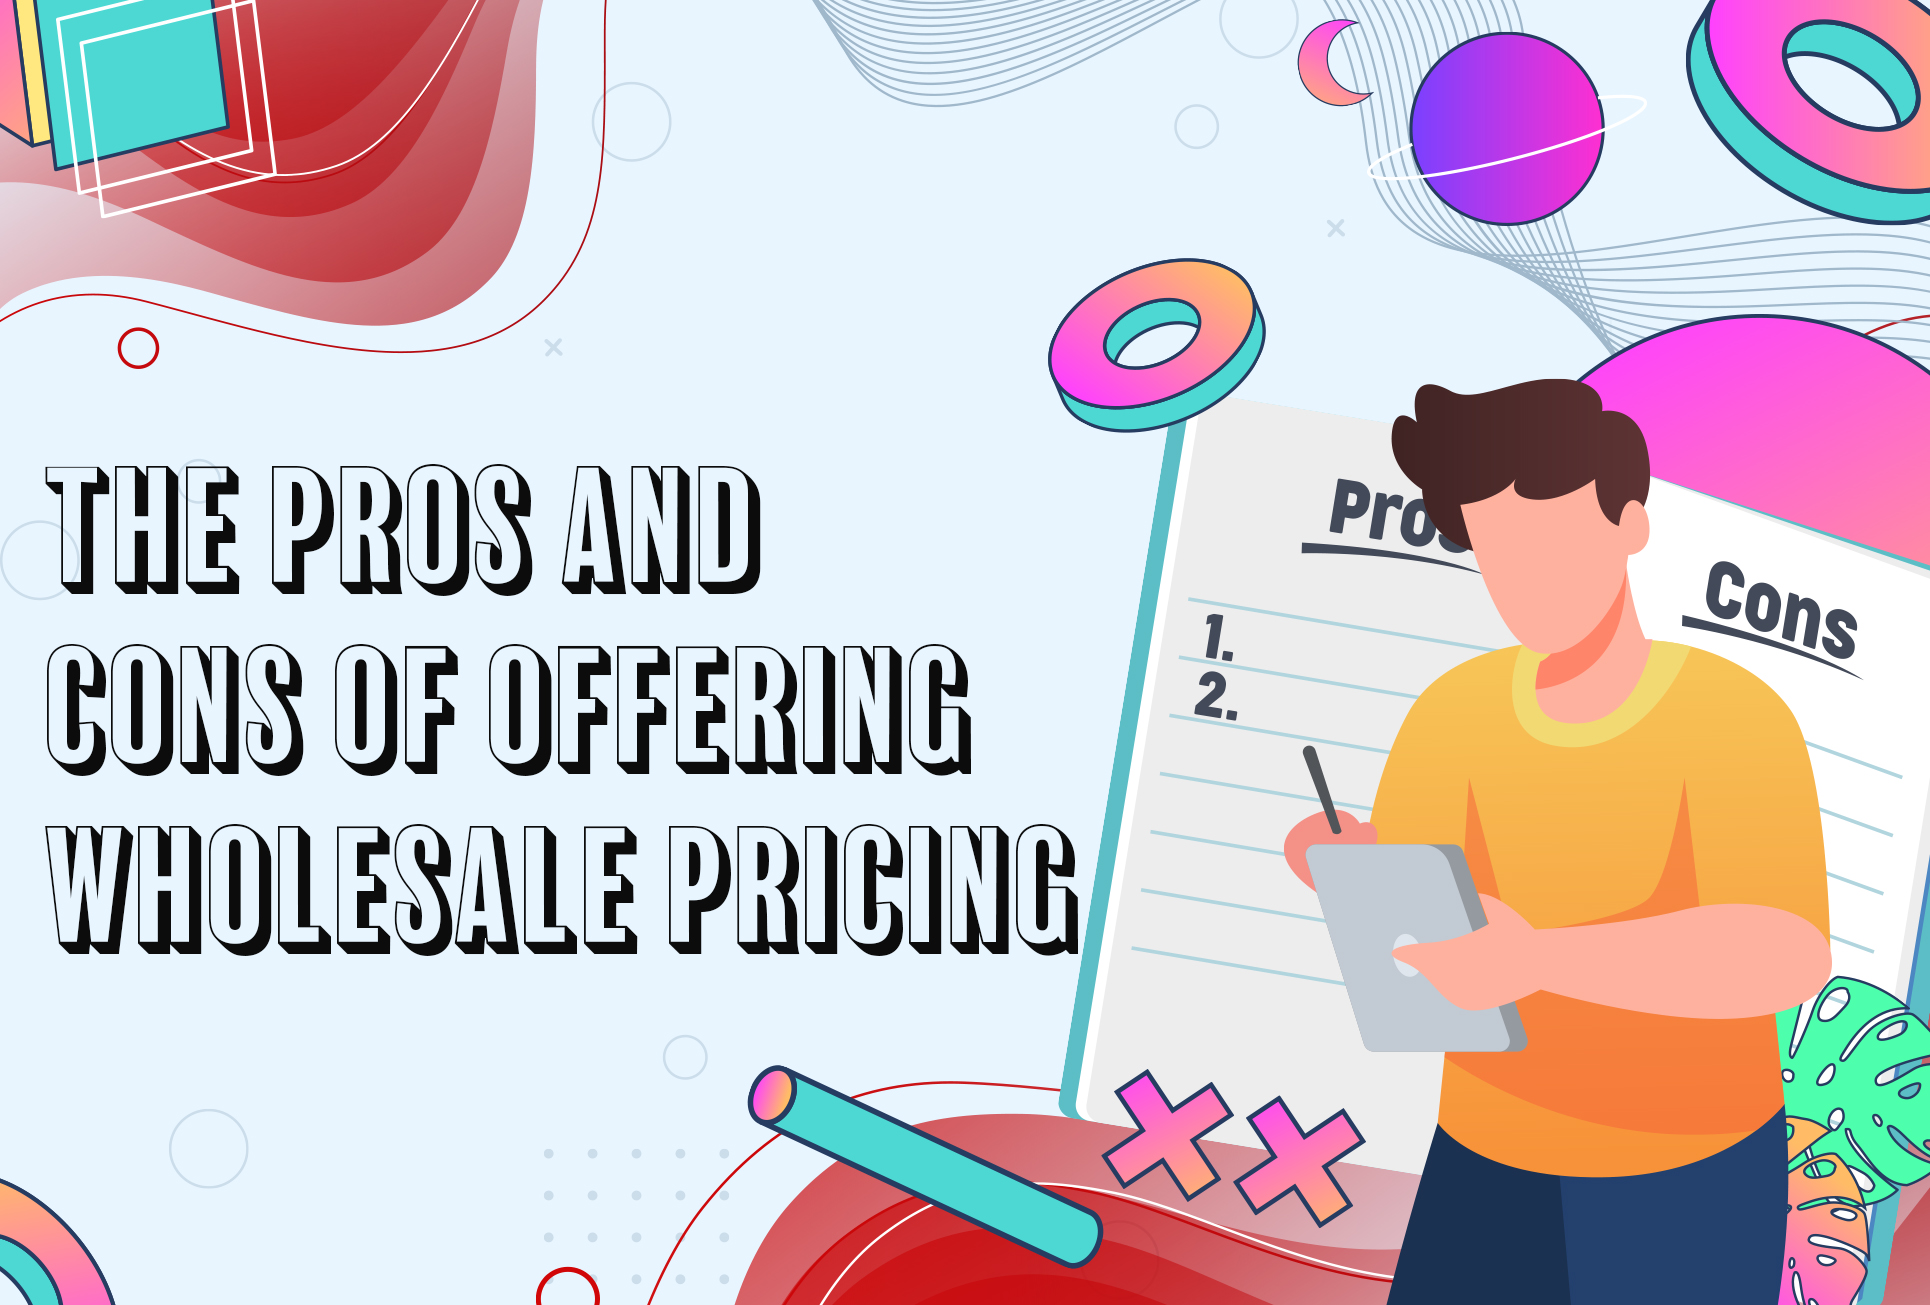 The pros and cons of offering wholesale pricing